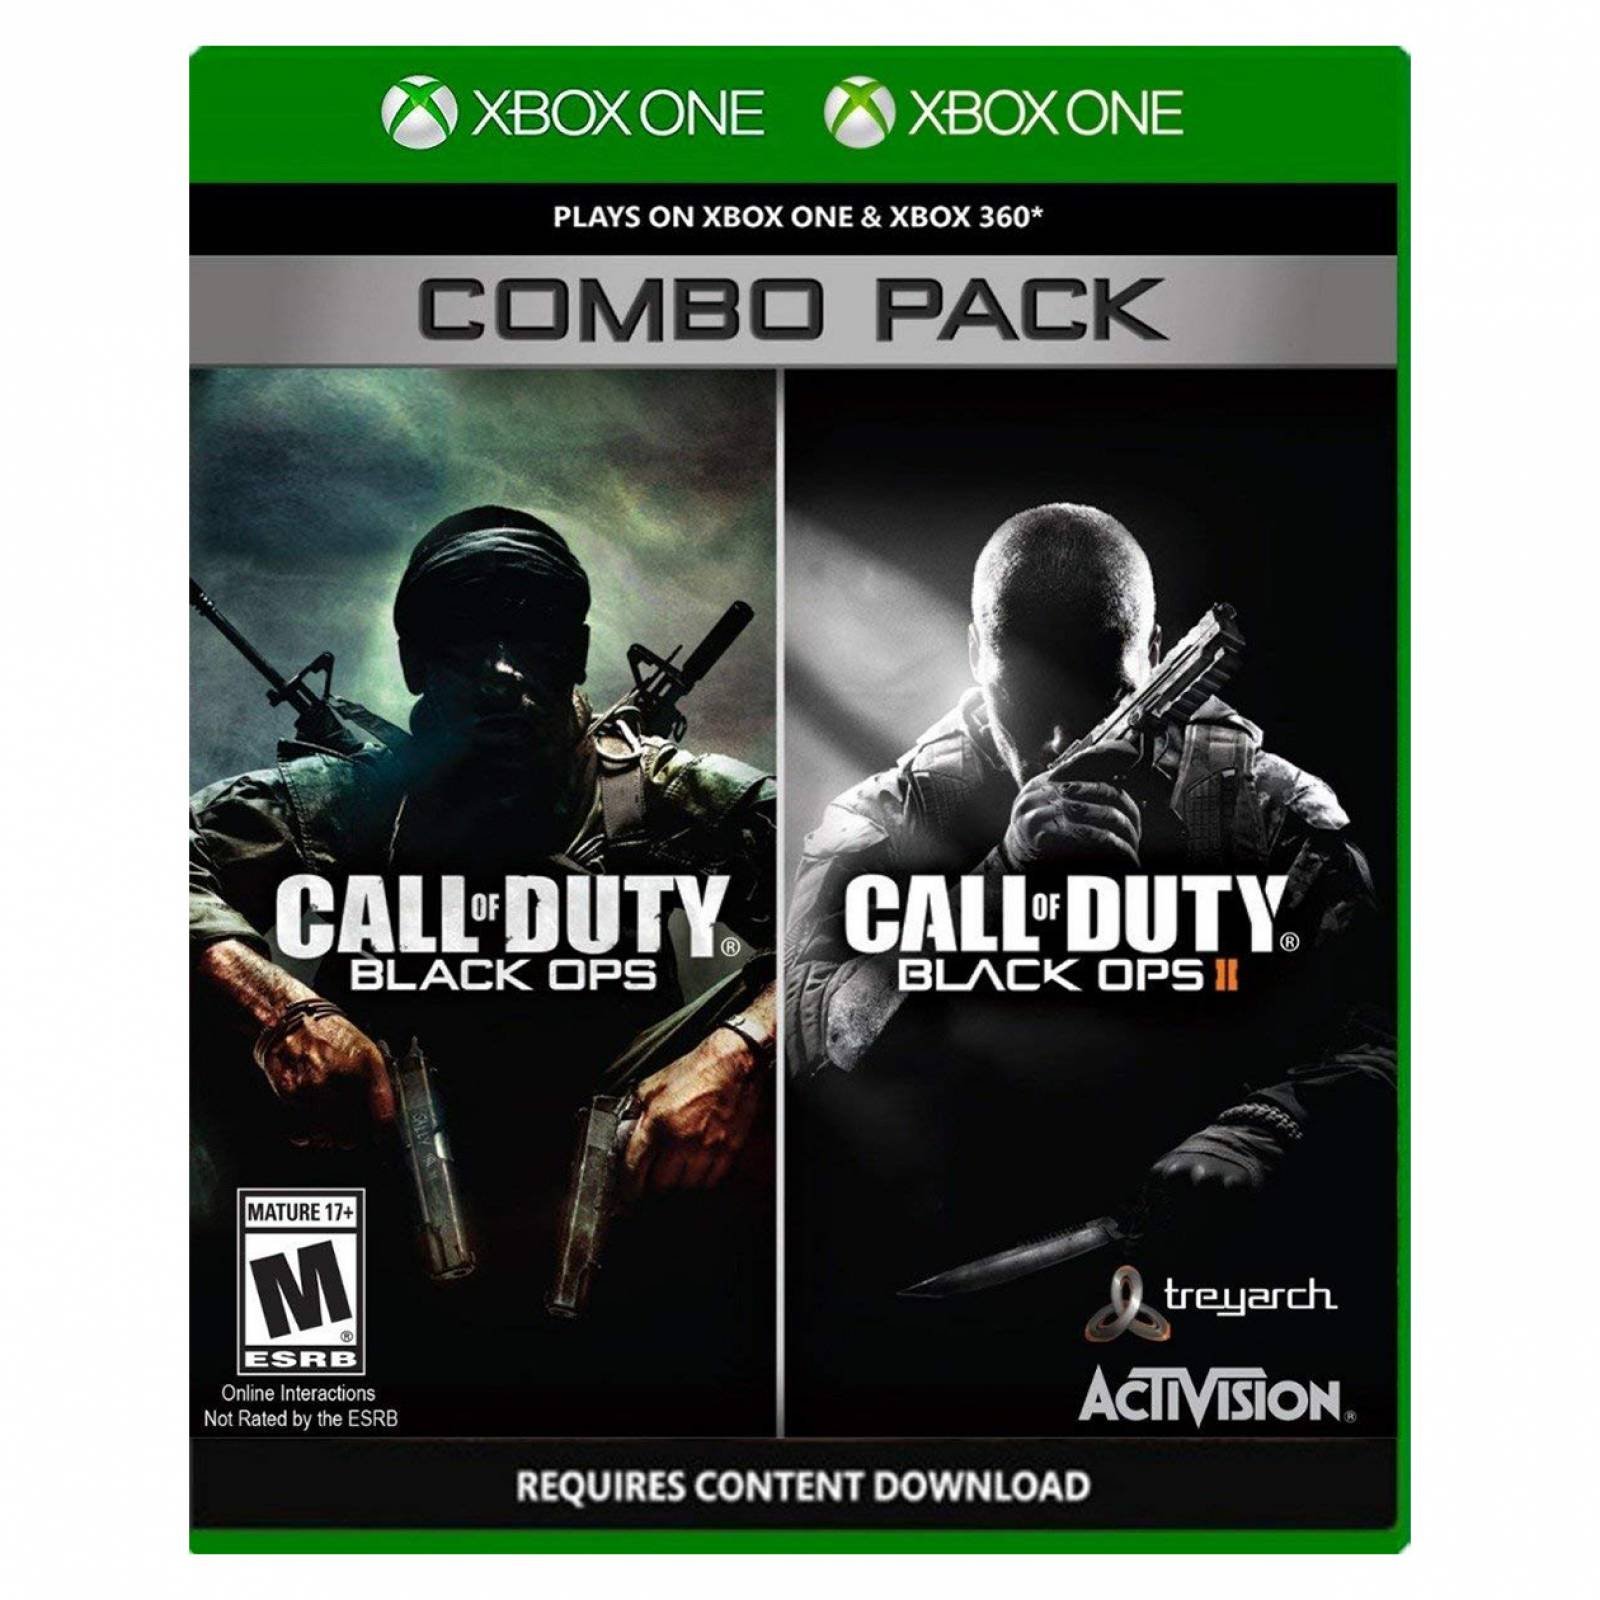 Call of duty xbox game. Call of Duty диск на Xbox 360. Call of Duty 2 Xbox 360. Black ops 2 Xbox 360 freeboot. Xbox one Call of Duty Black ops2 наклейка.